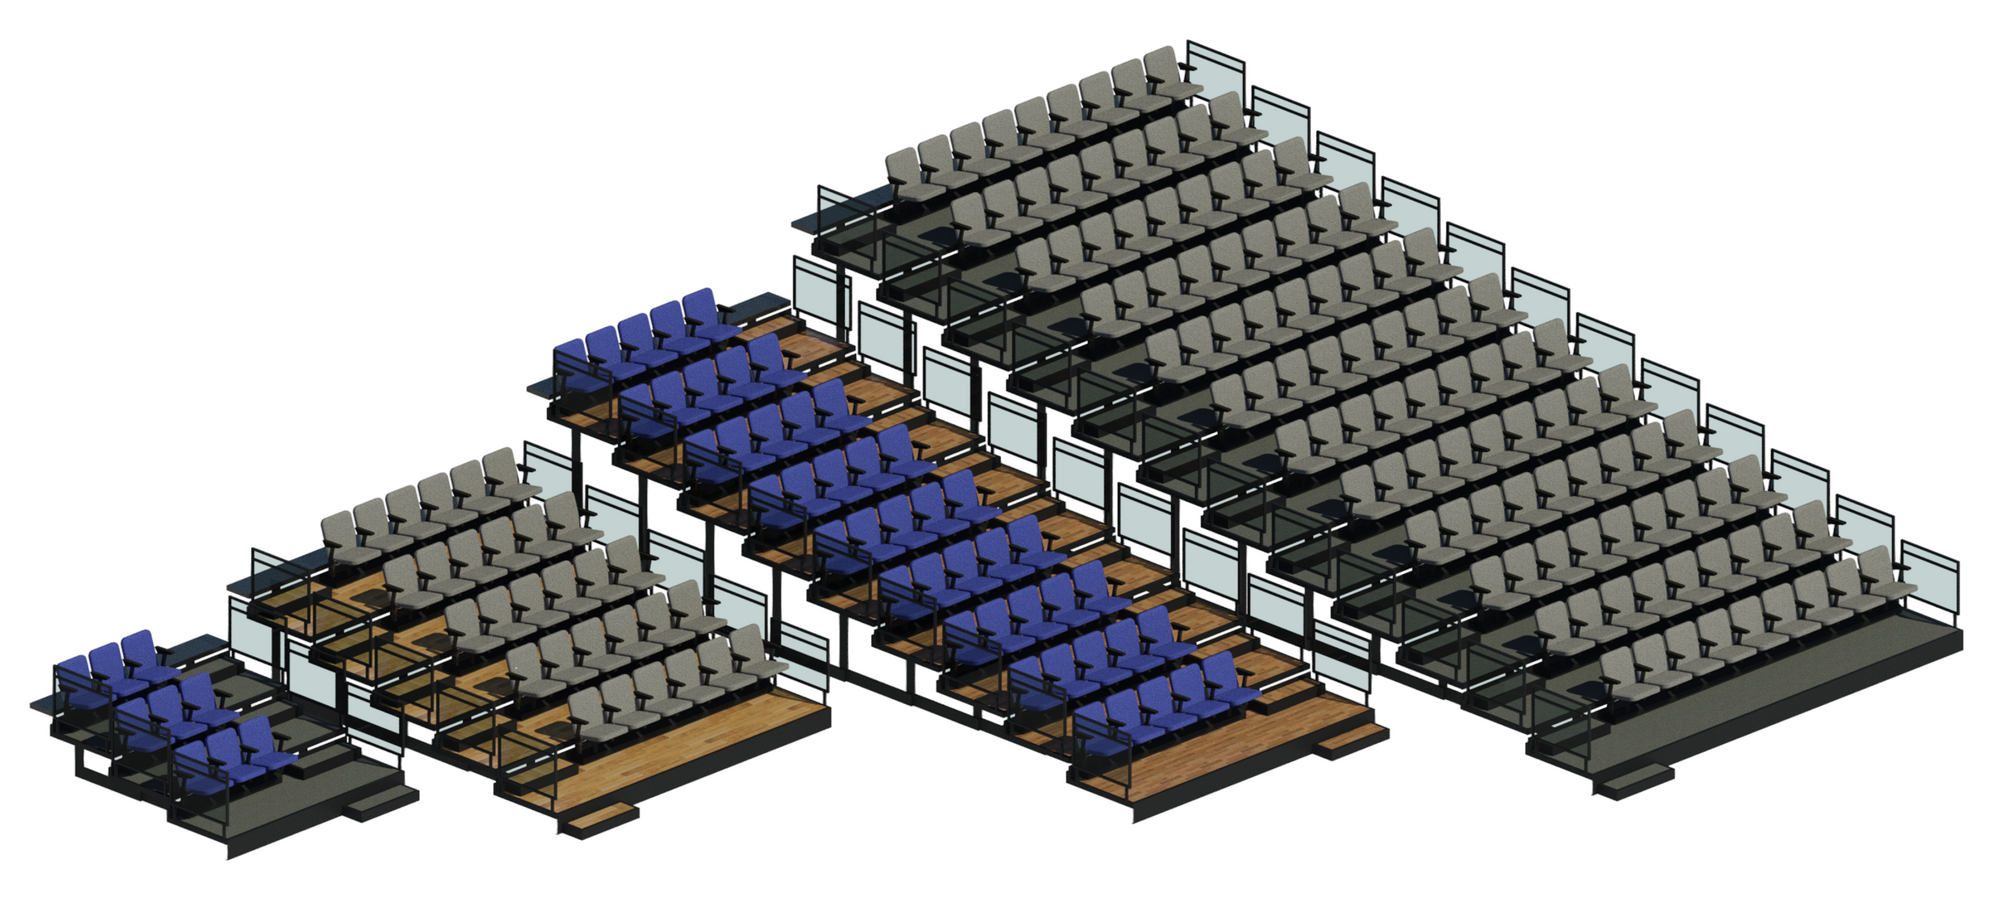 Revit family for retractable seating. Default types range from 9-100+ seats with various materials.